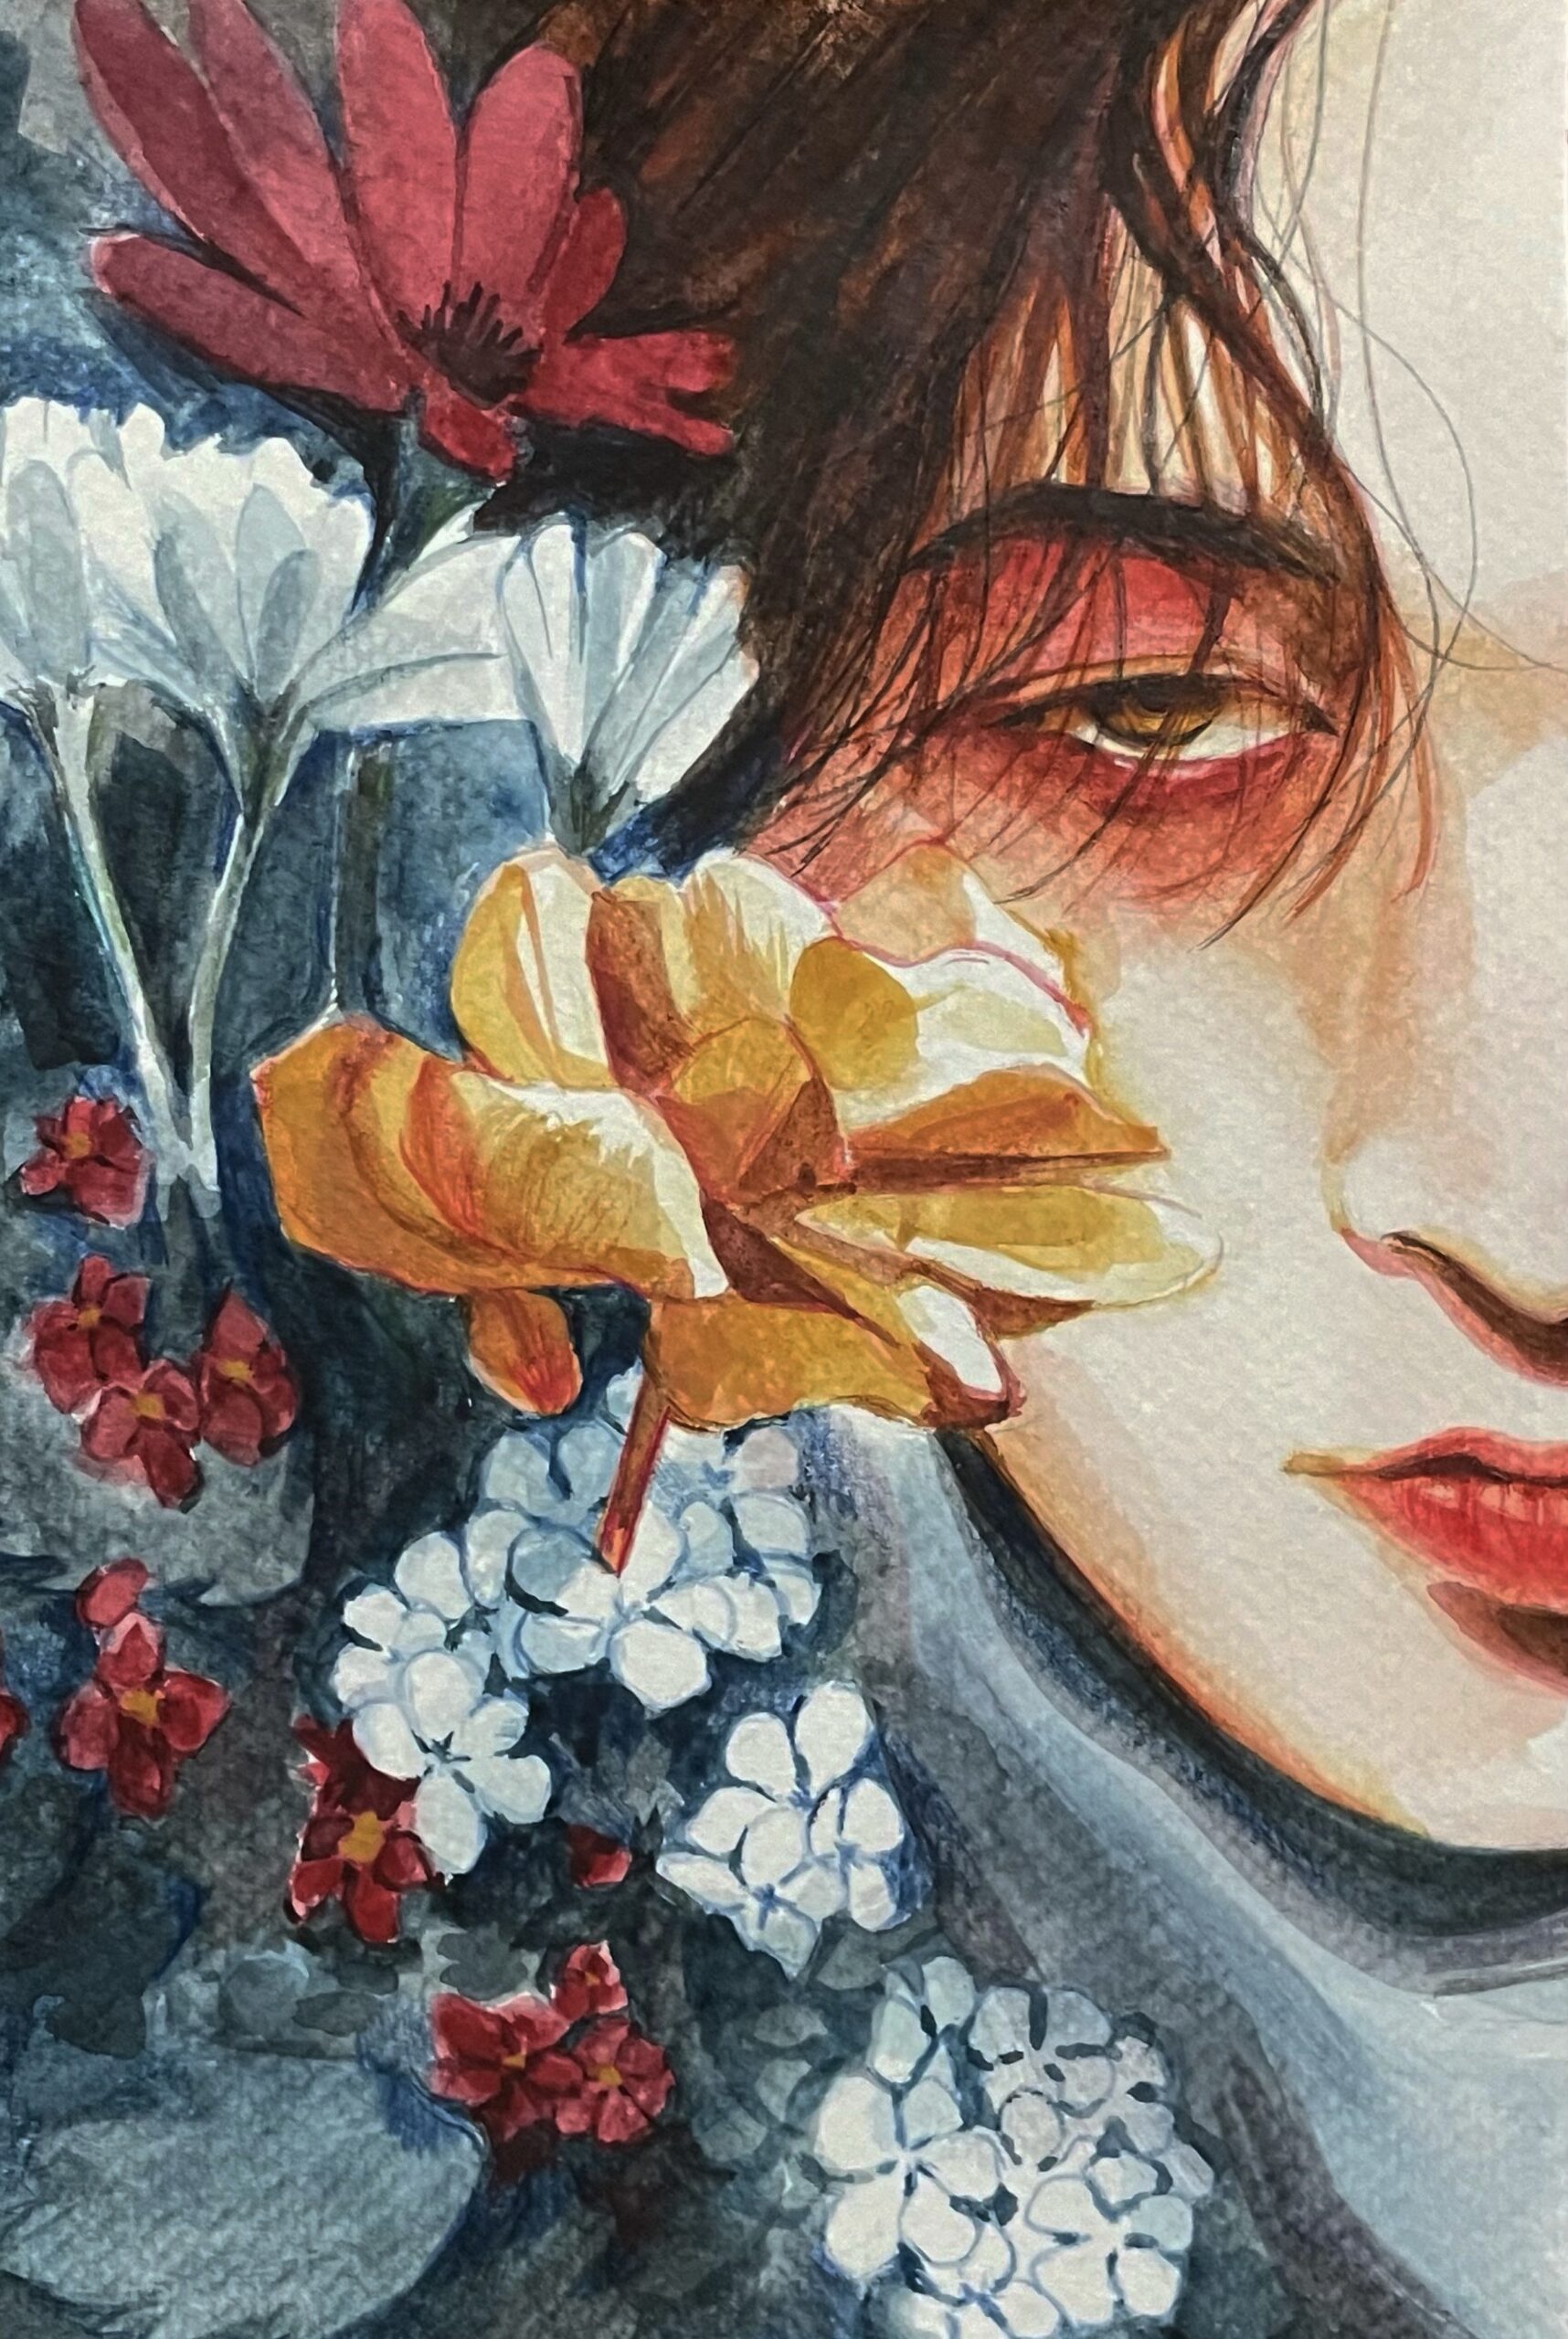 Watercolor and colored pencil piece by Mica Viacrucis of half a face with abrun around the eye, surrounded by flowers